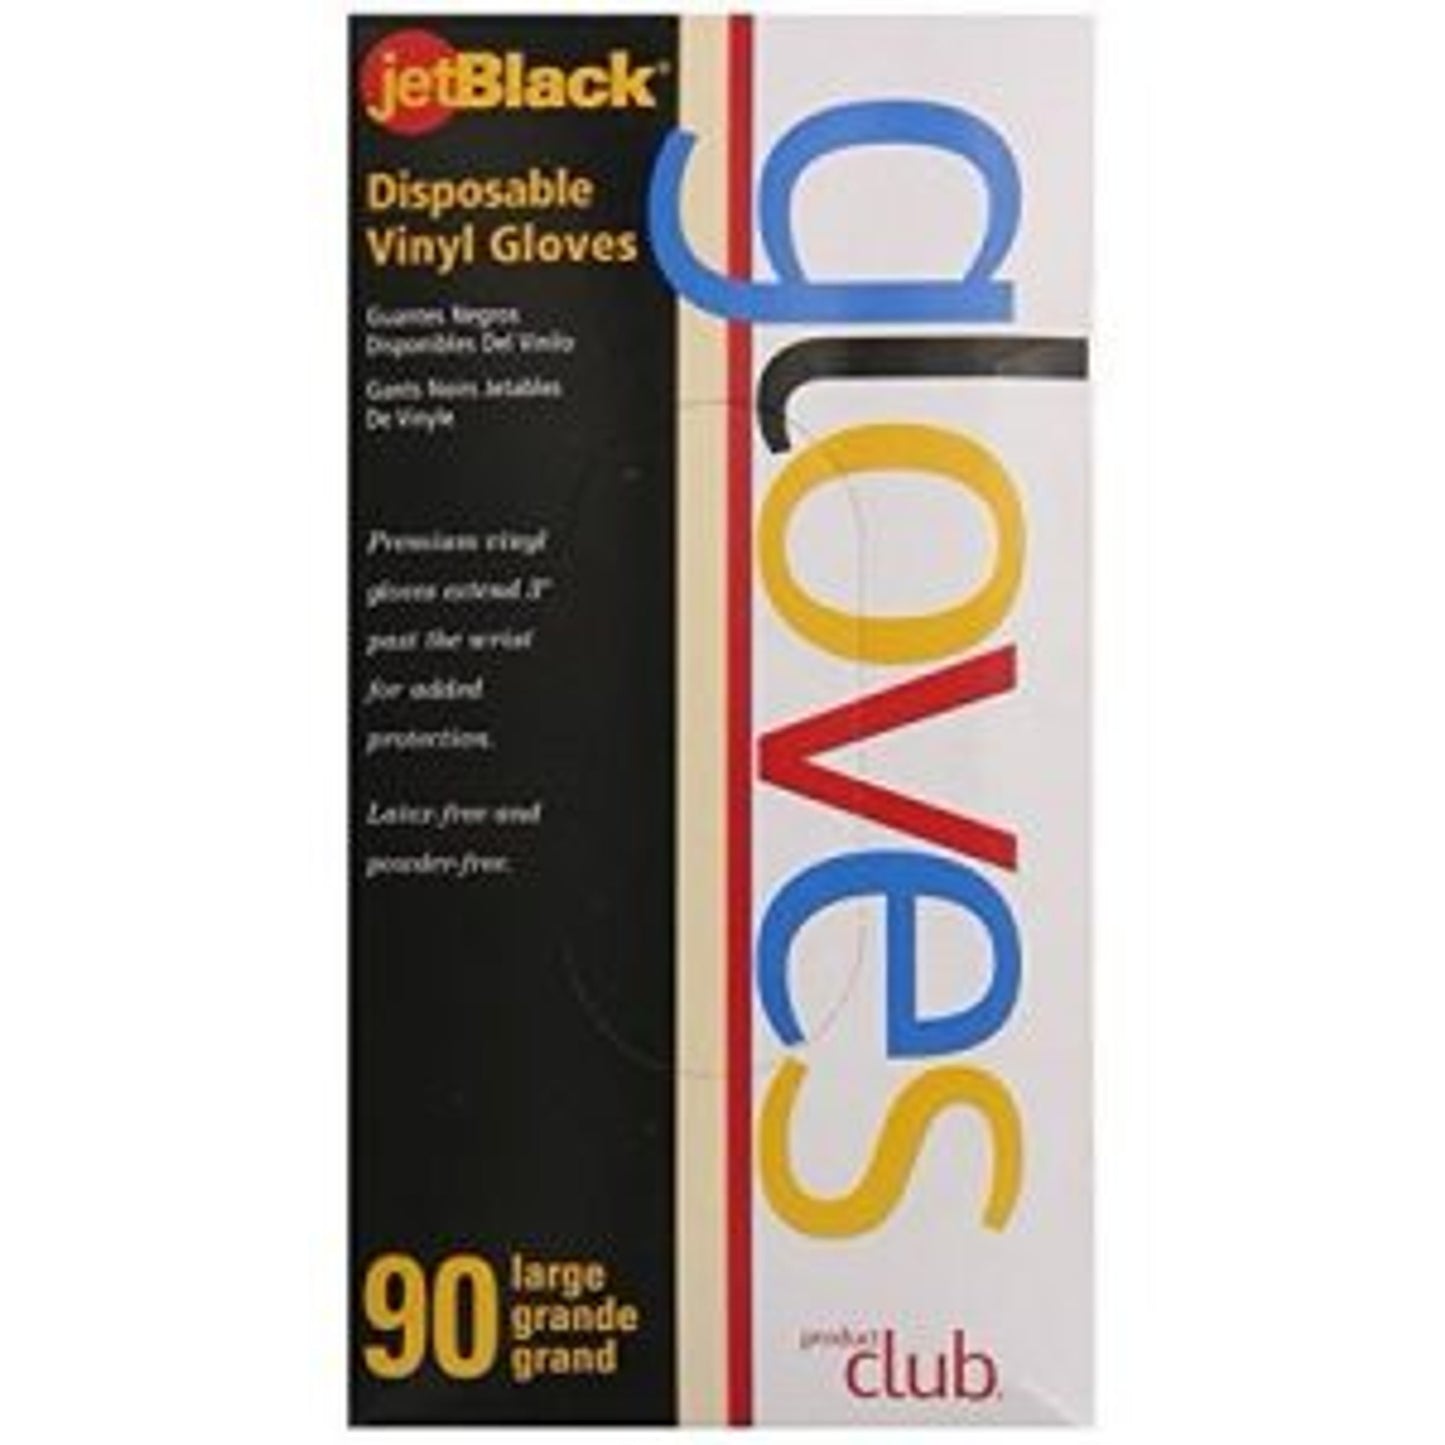 Product Club Disposable Vinyl Gloves - 90ct.